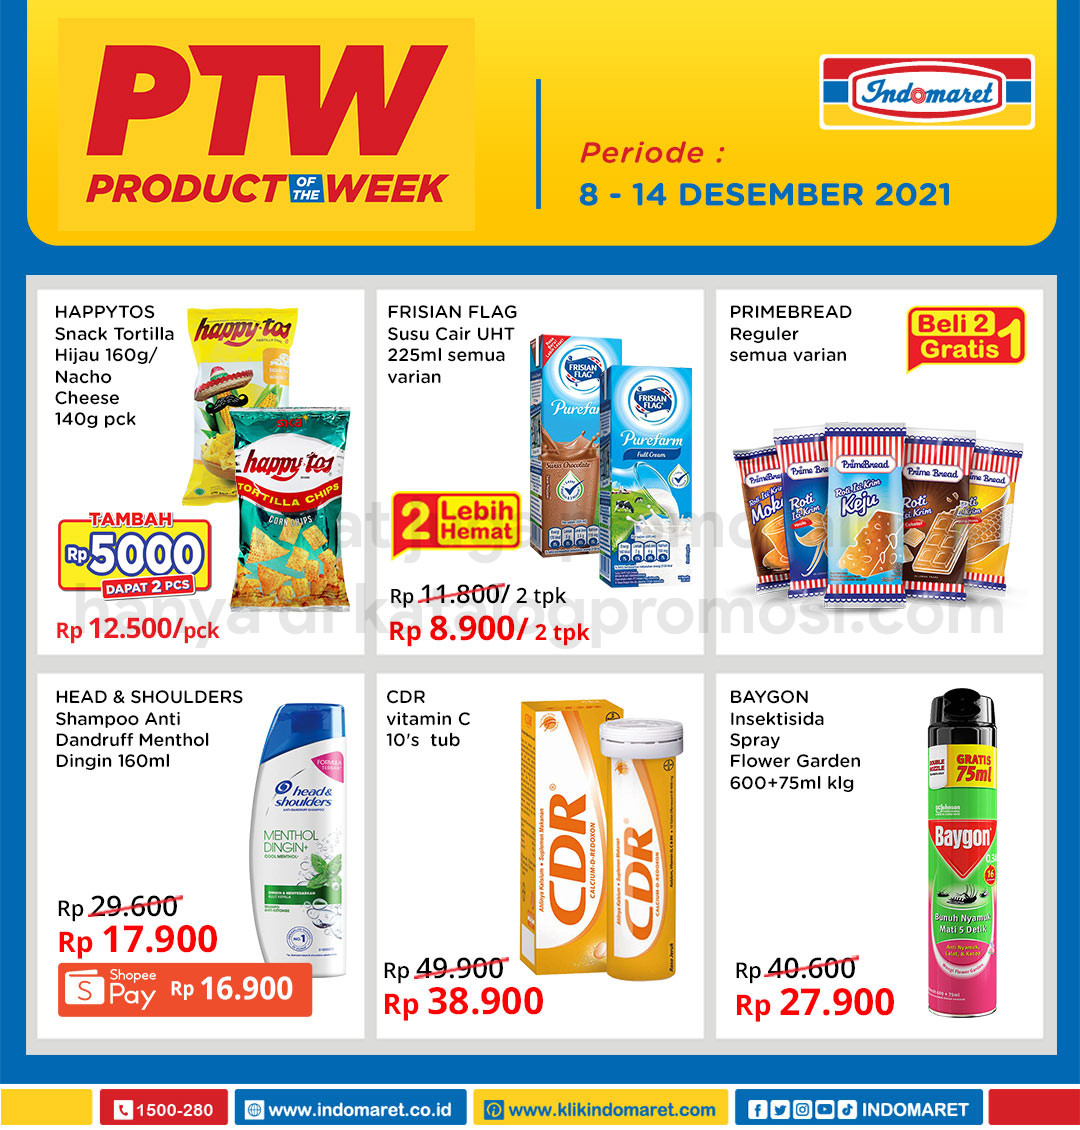 INDOMARET Promo PTW – PRODUCT of The Week periode 08-14 Desember 2021